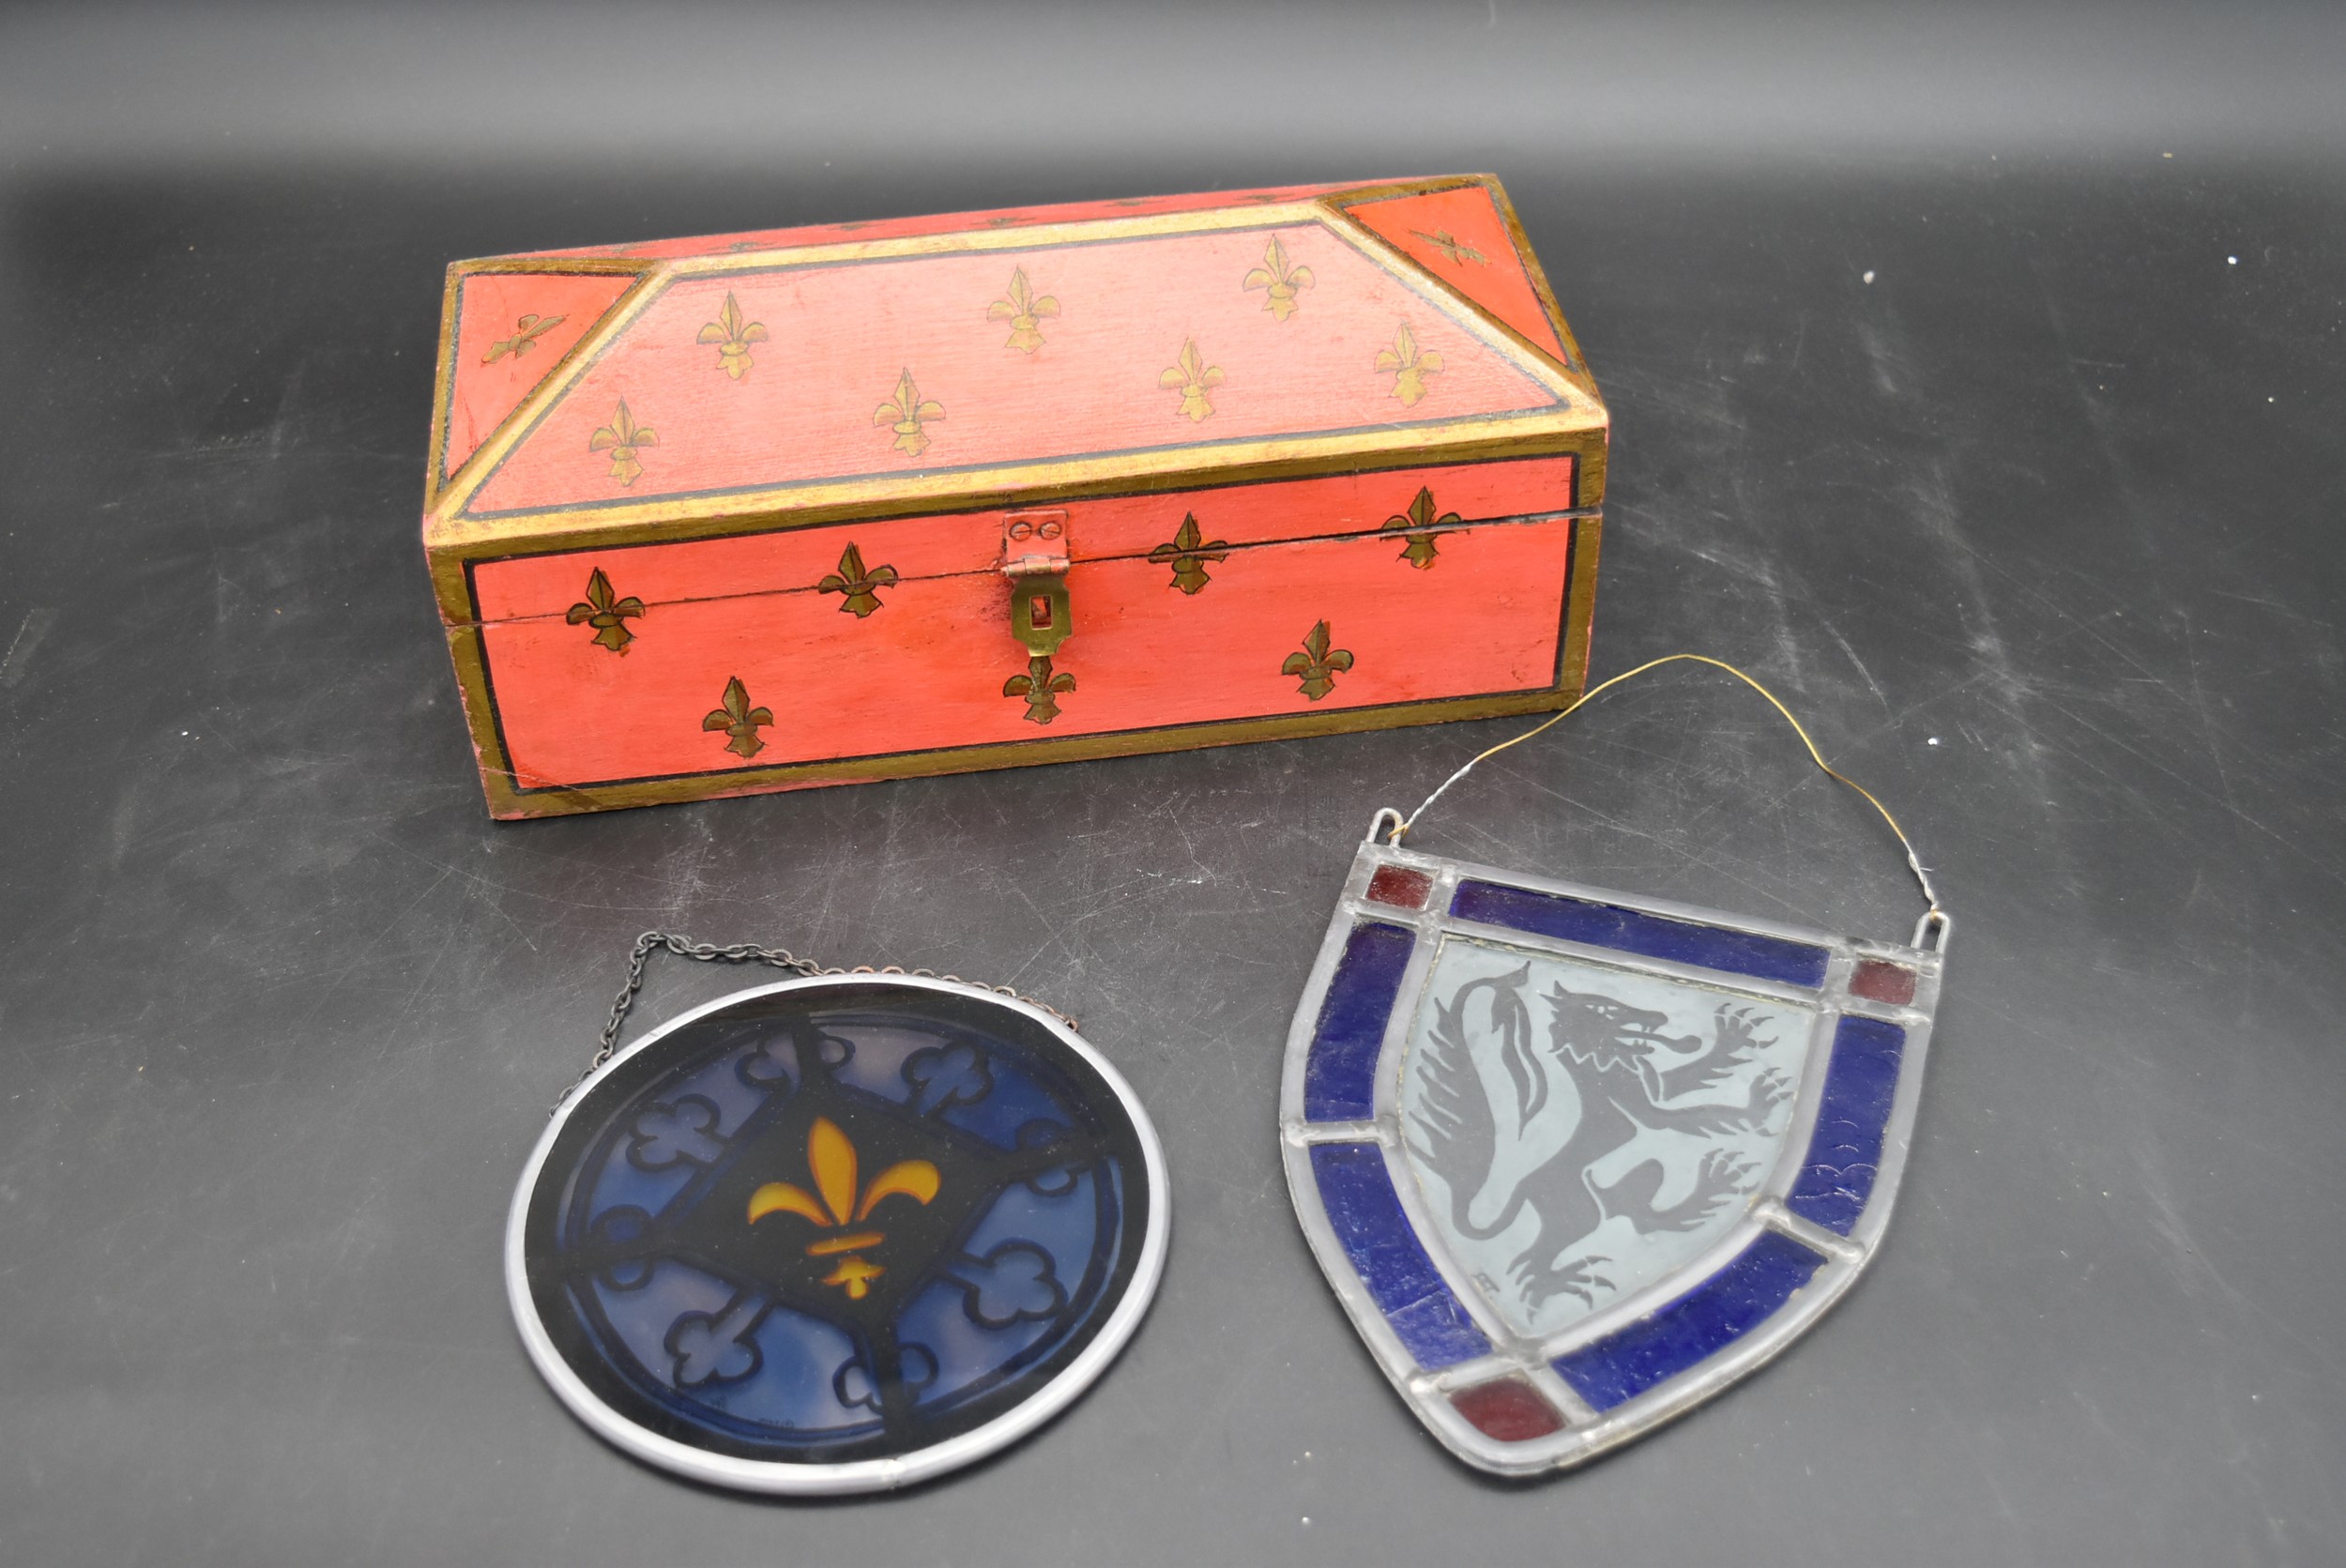 A painted casket with Fleur-de-Lys detail along with two coloured and leaded glass hanging panels.